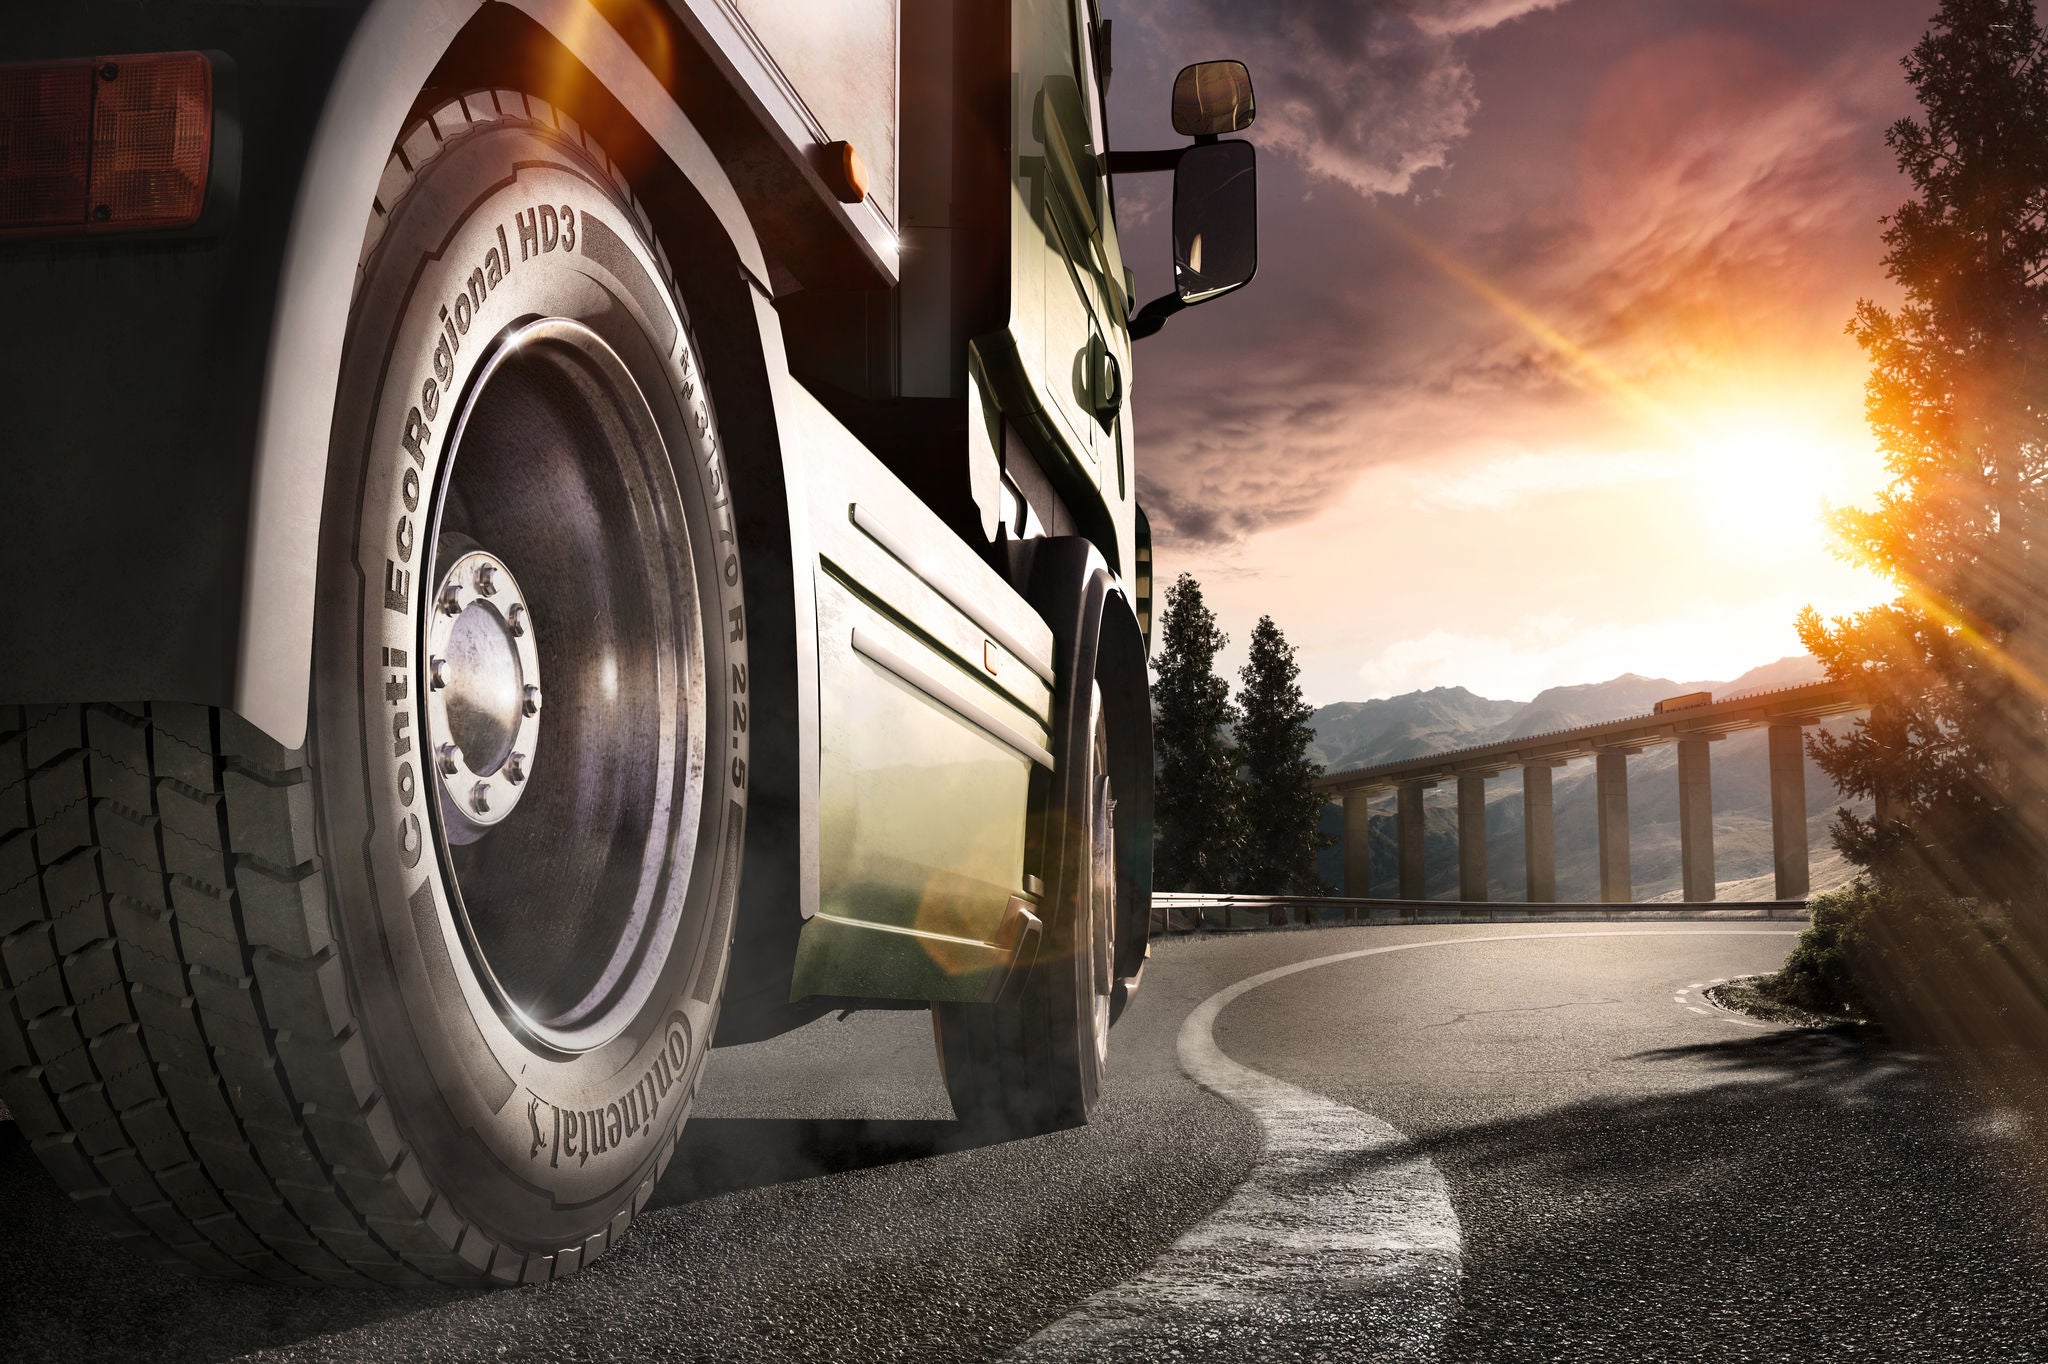 What truck tyres tell us